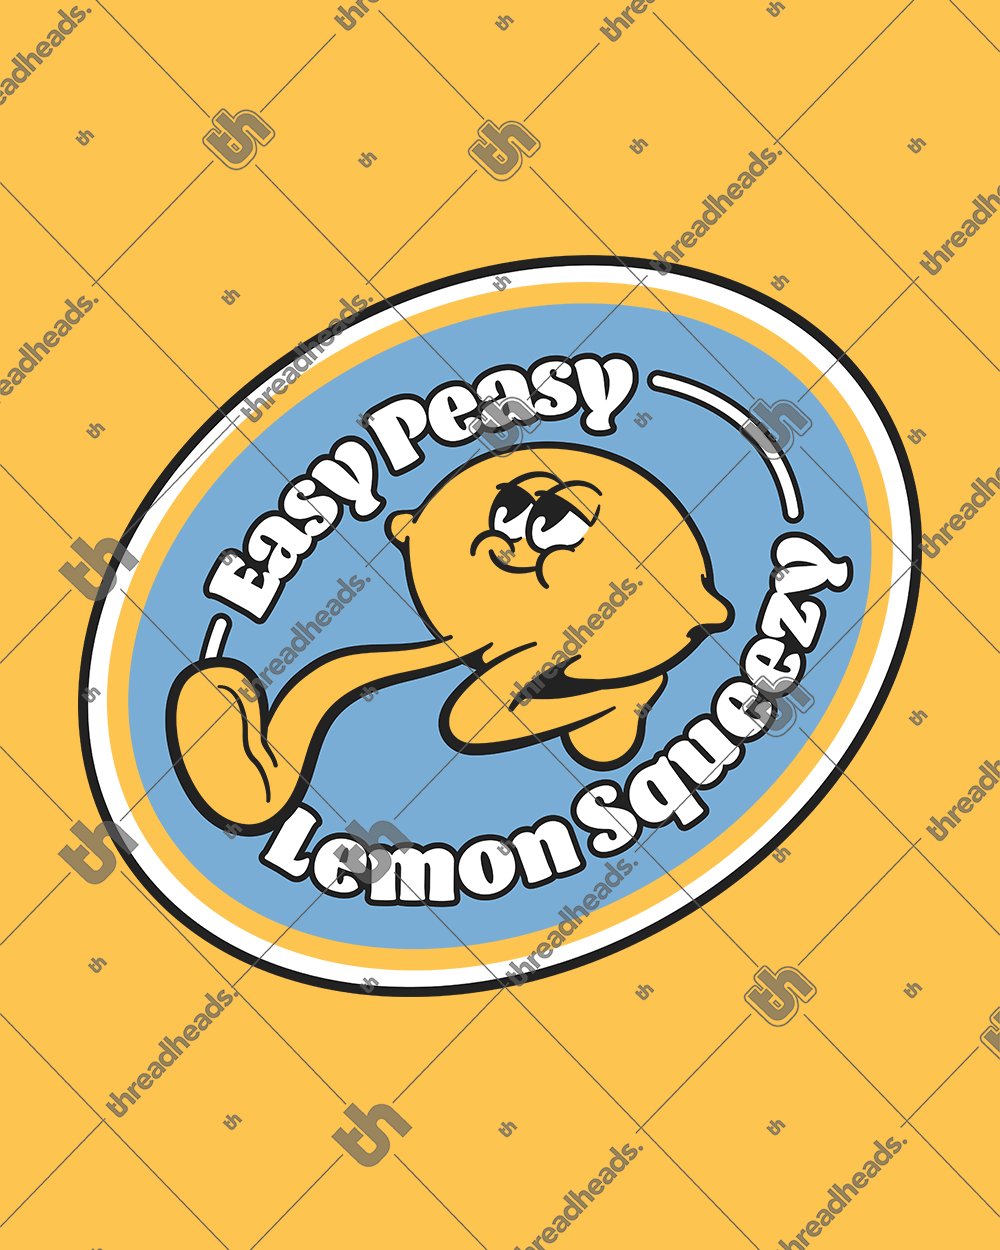 Easy Peasy Lemon Squeezy T-Shirt Europe Online #colour_yellow